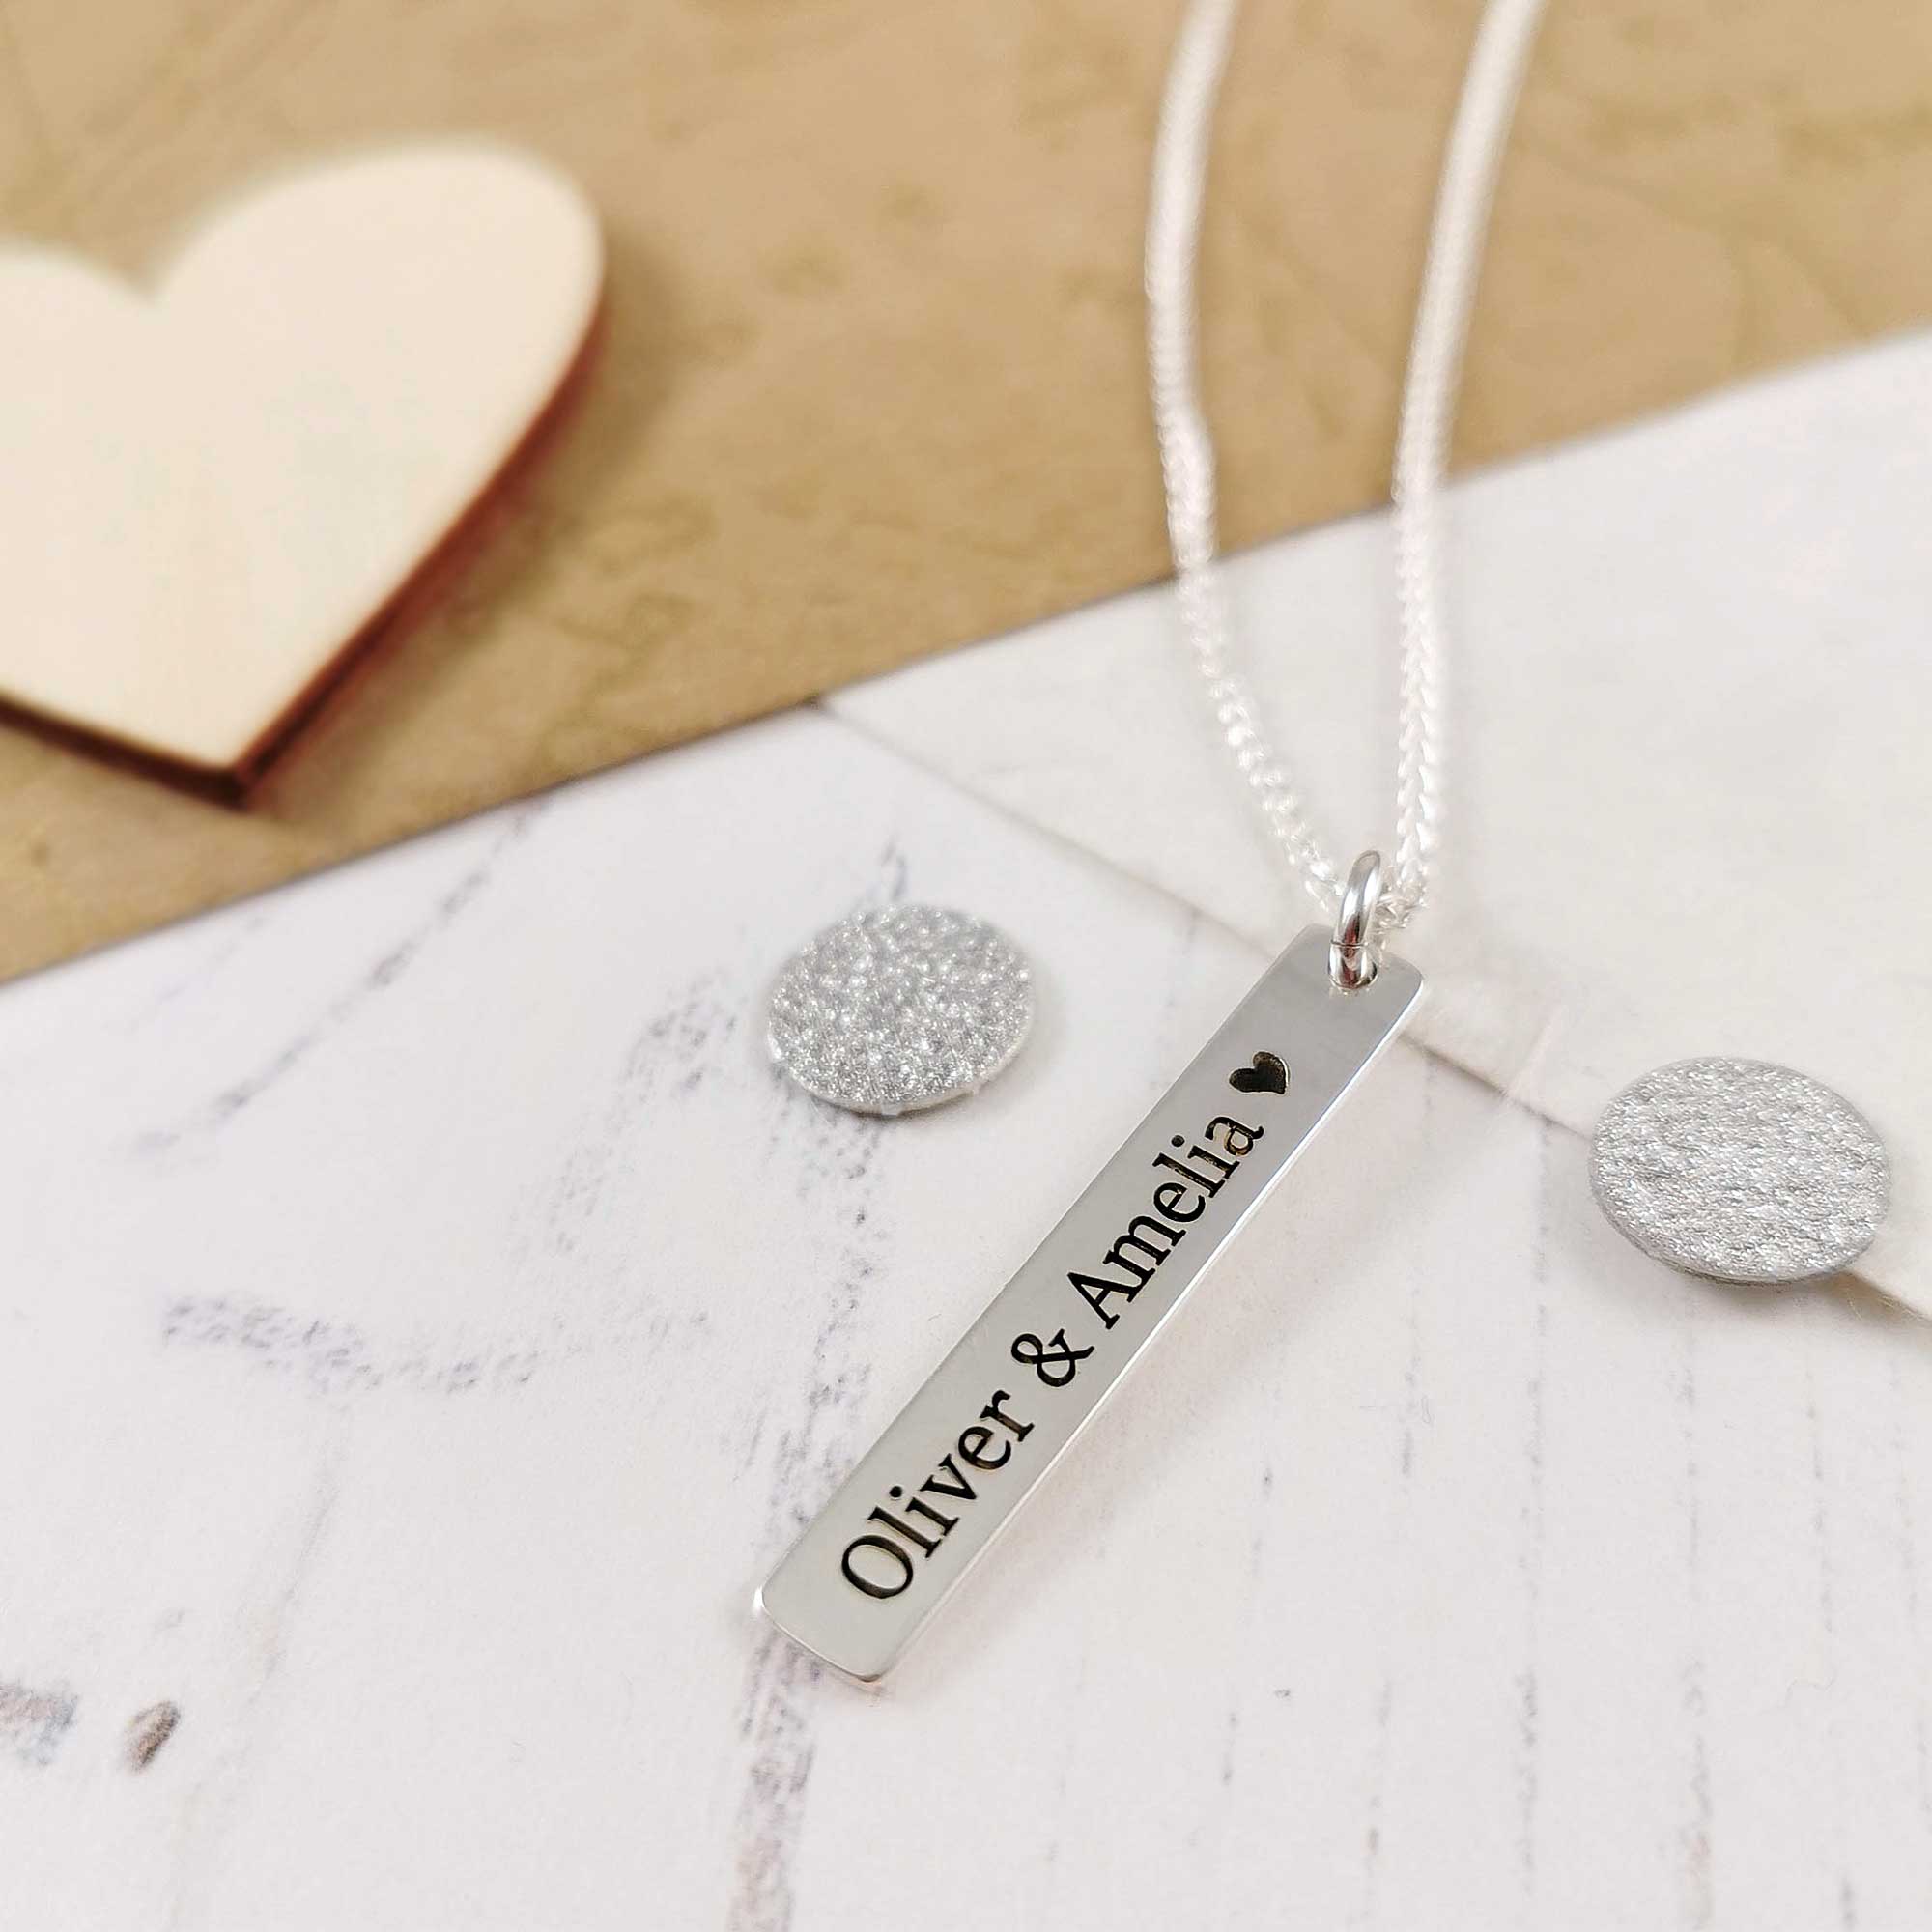 Personalised solid sterling silver tag necklace engraved with name date or message Scarlett Jewellery